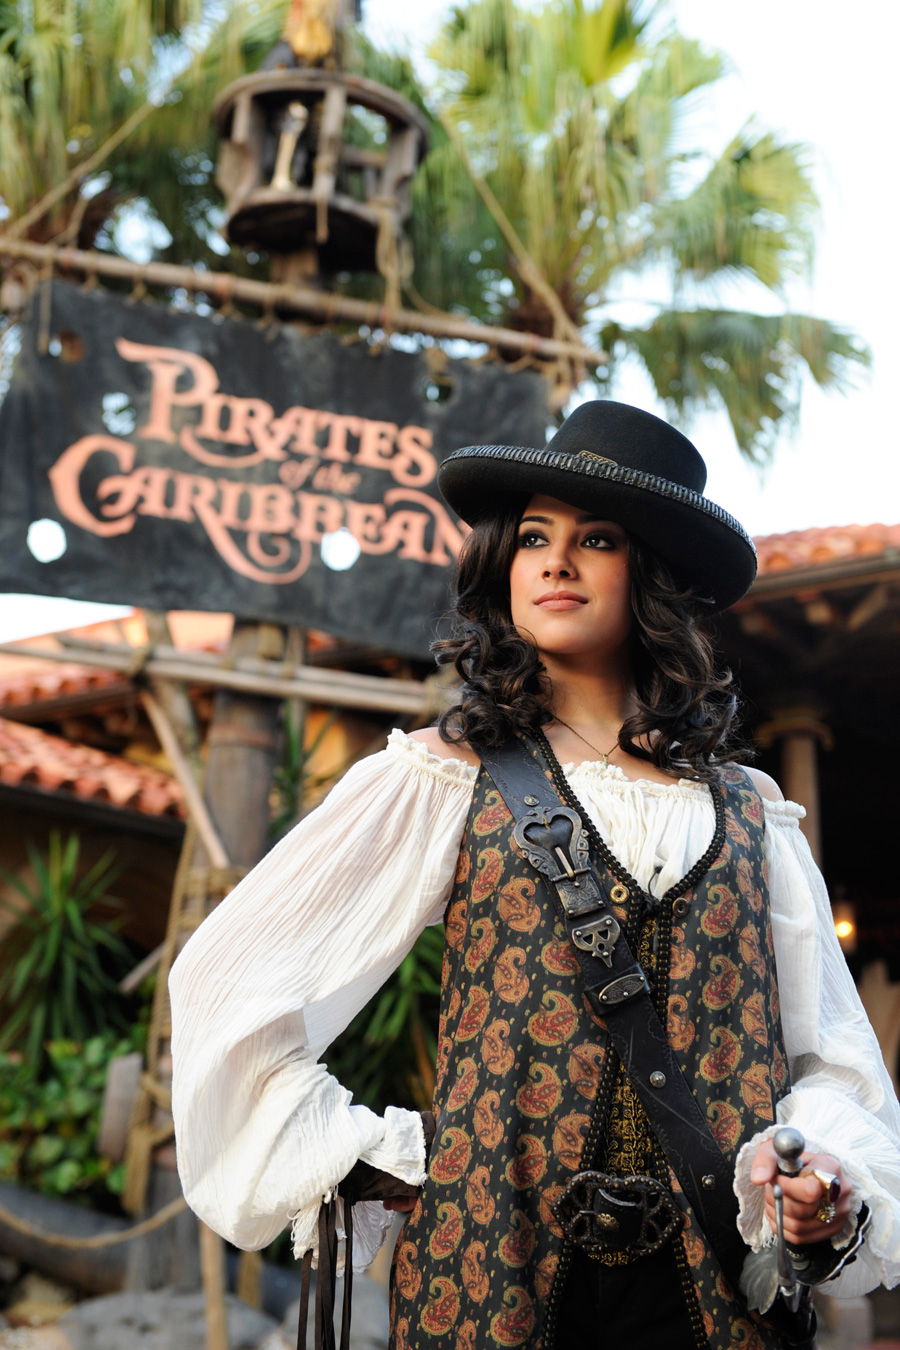 Angelica of 'Pirates of the Caribbean: On Stranger Tides'